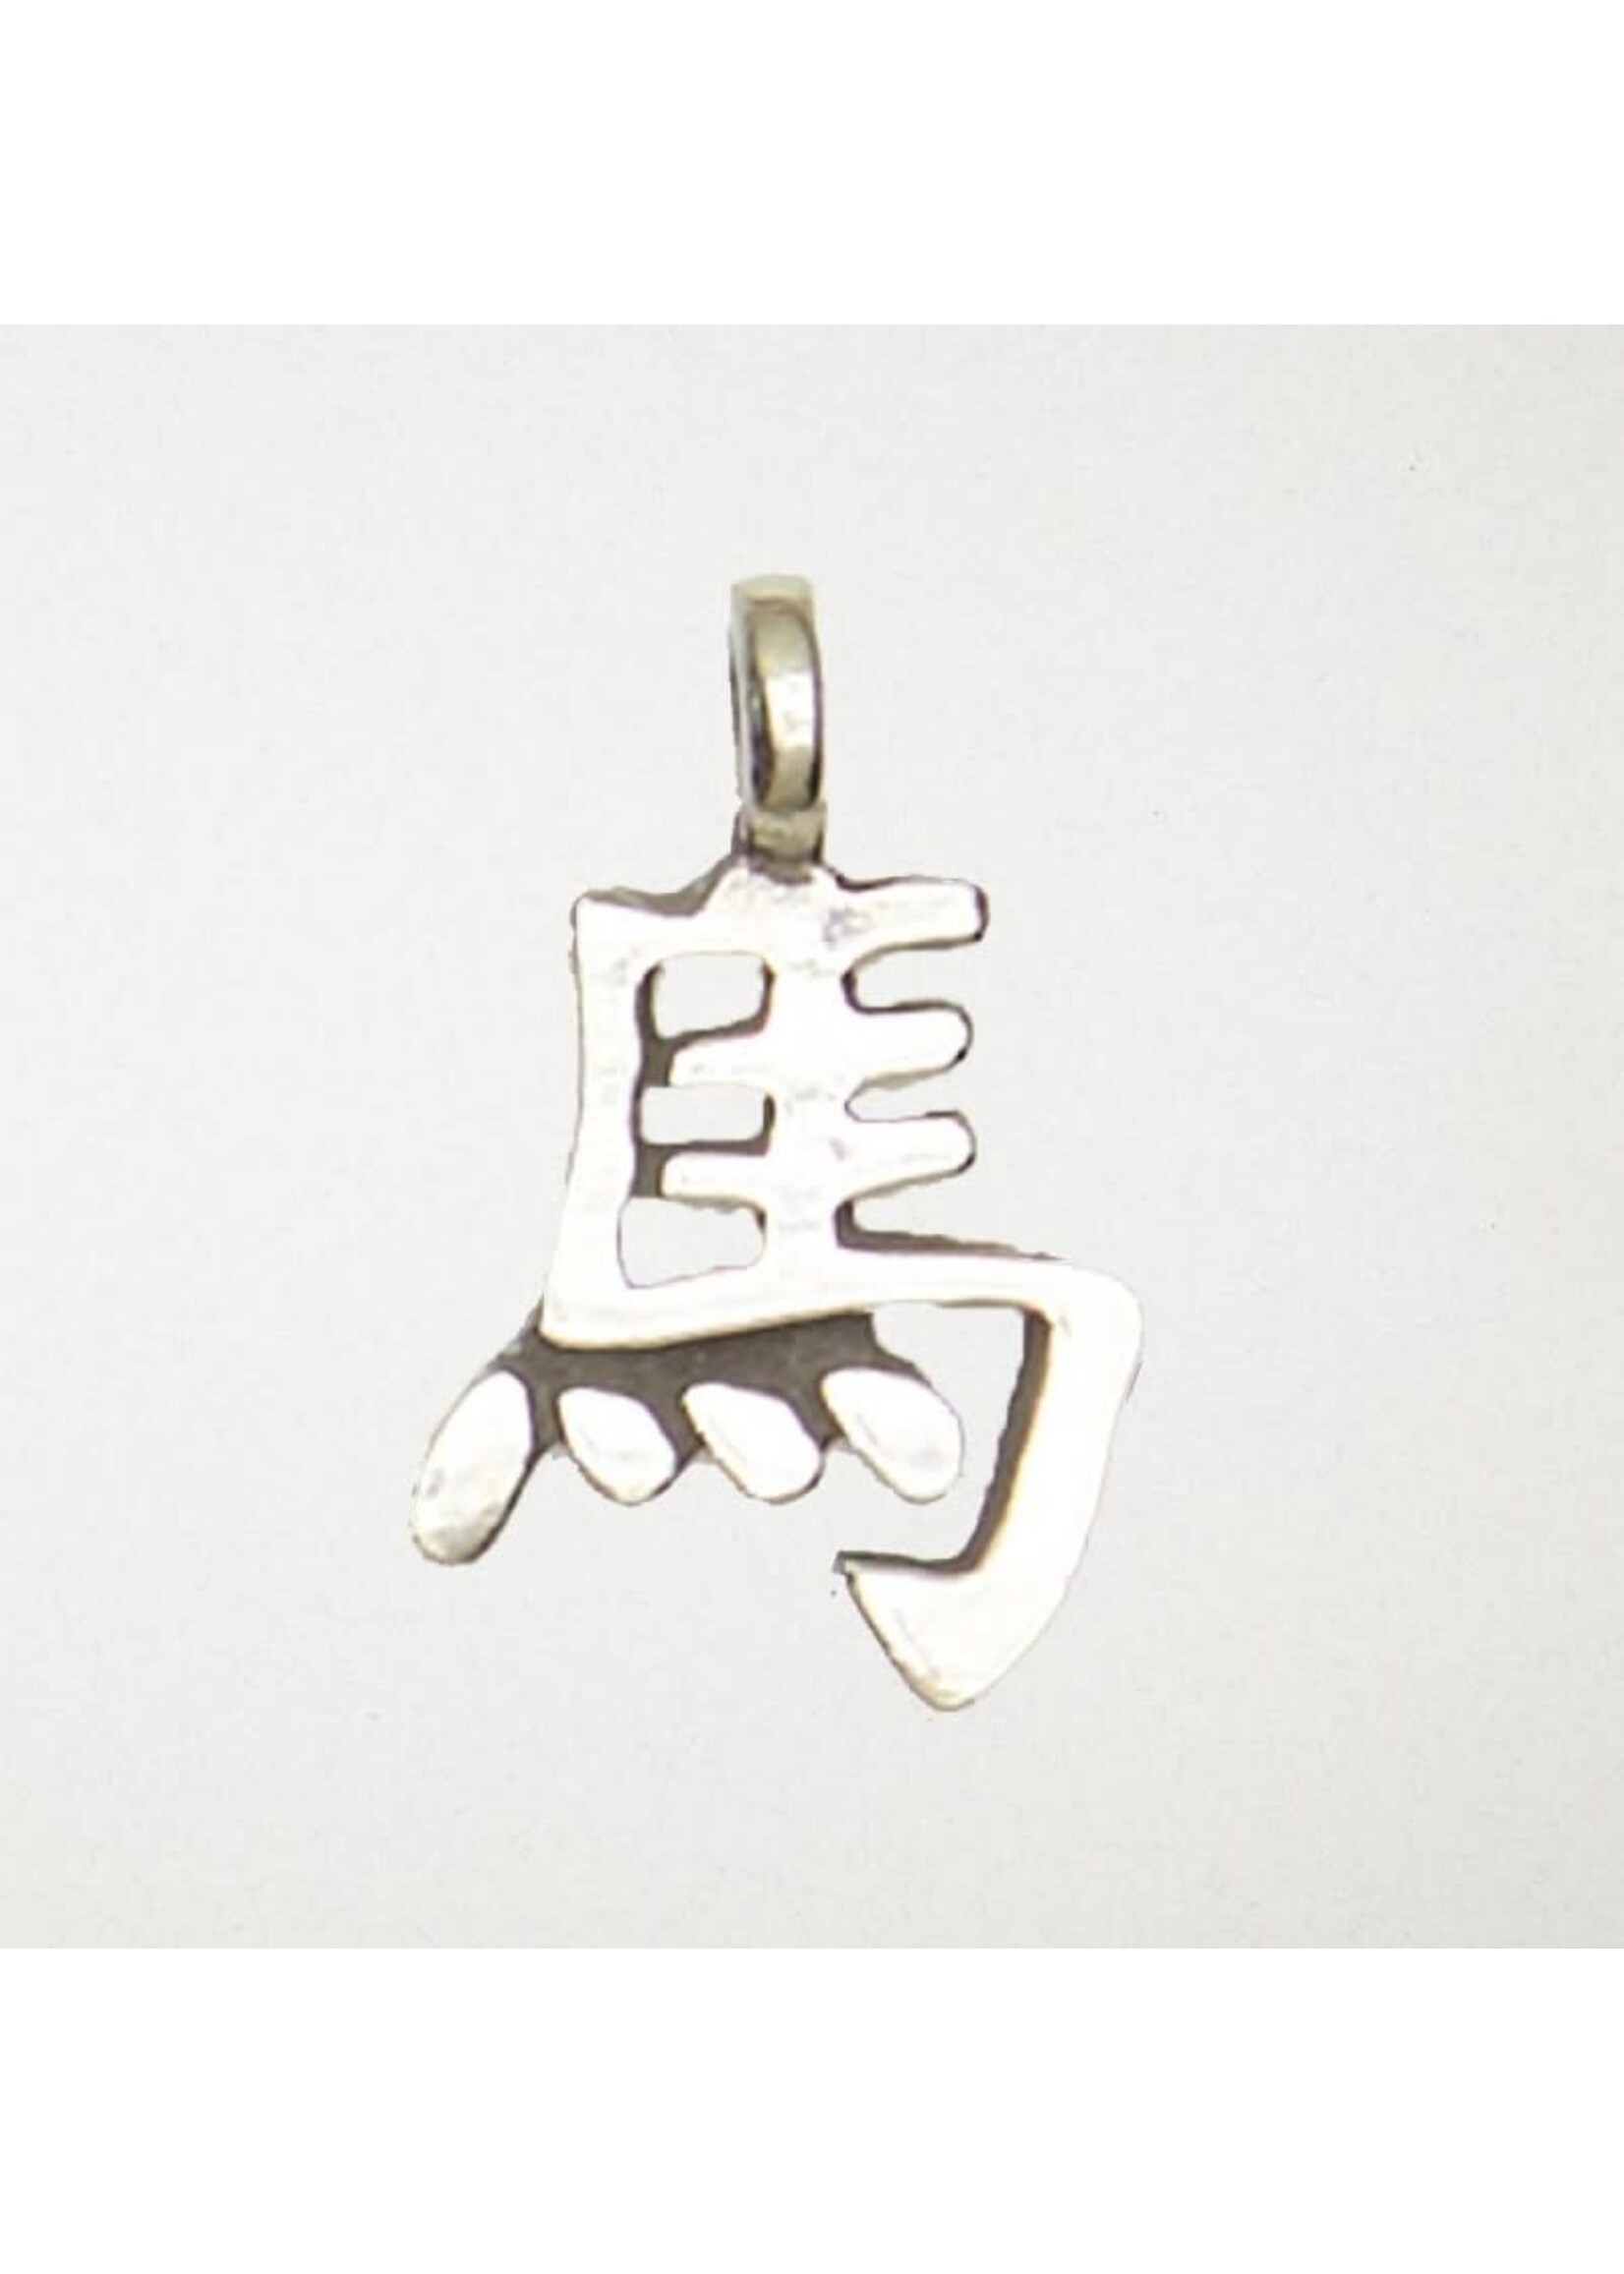 Chinese Astrology Pewter Pendant - Horse